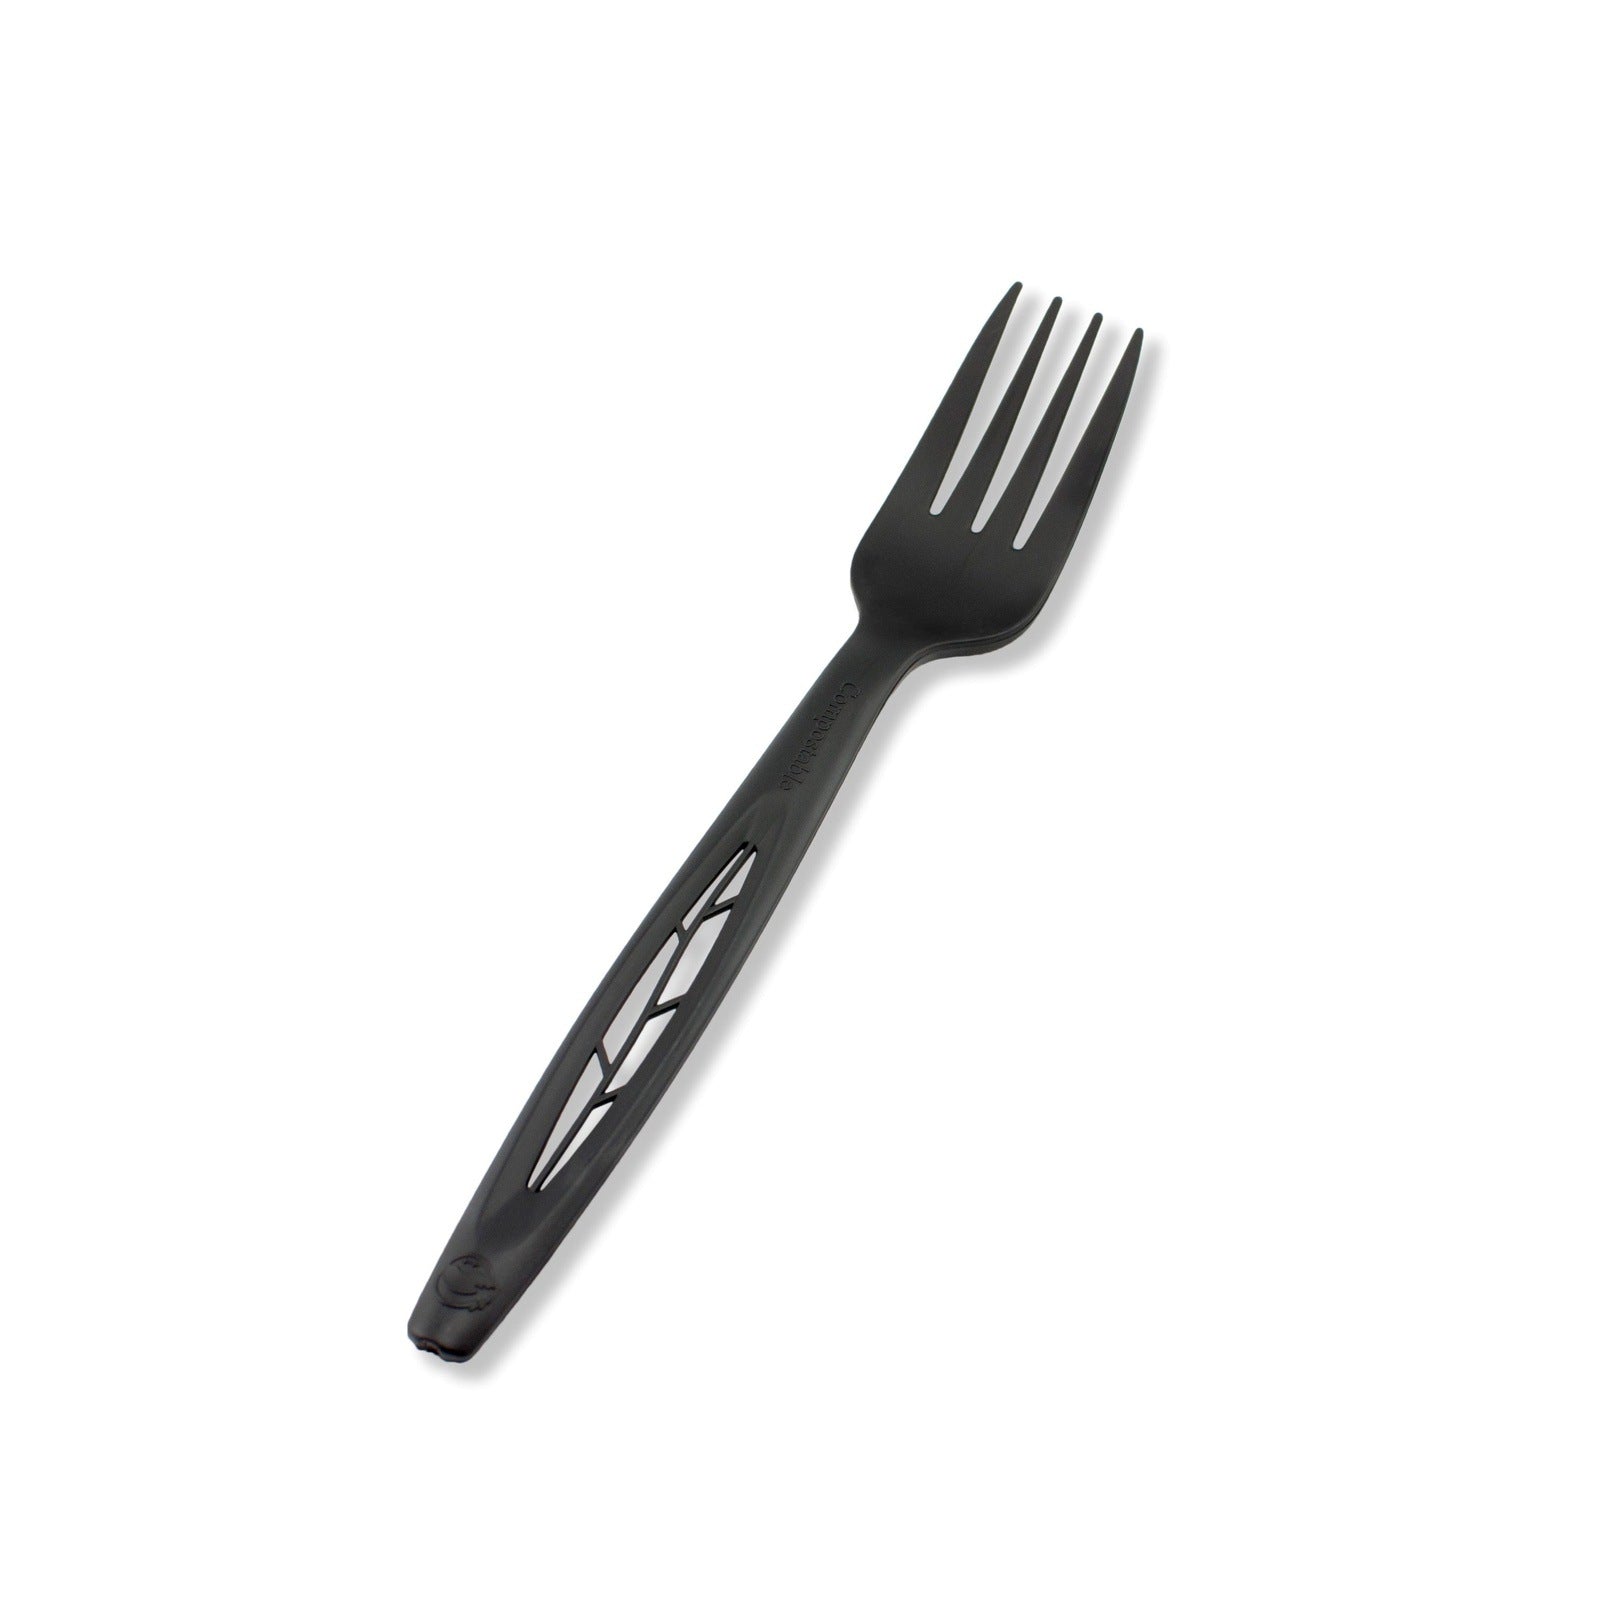 6.5" Heavy Duty Cutlery, Indv. Wrapped Fork, Black, 750-Count Case